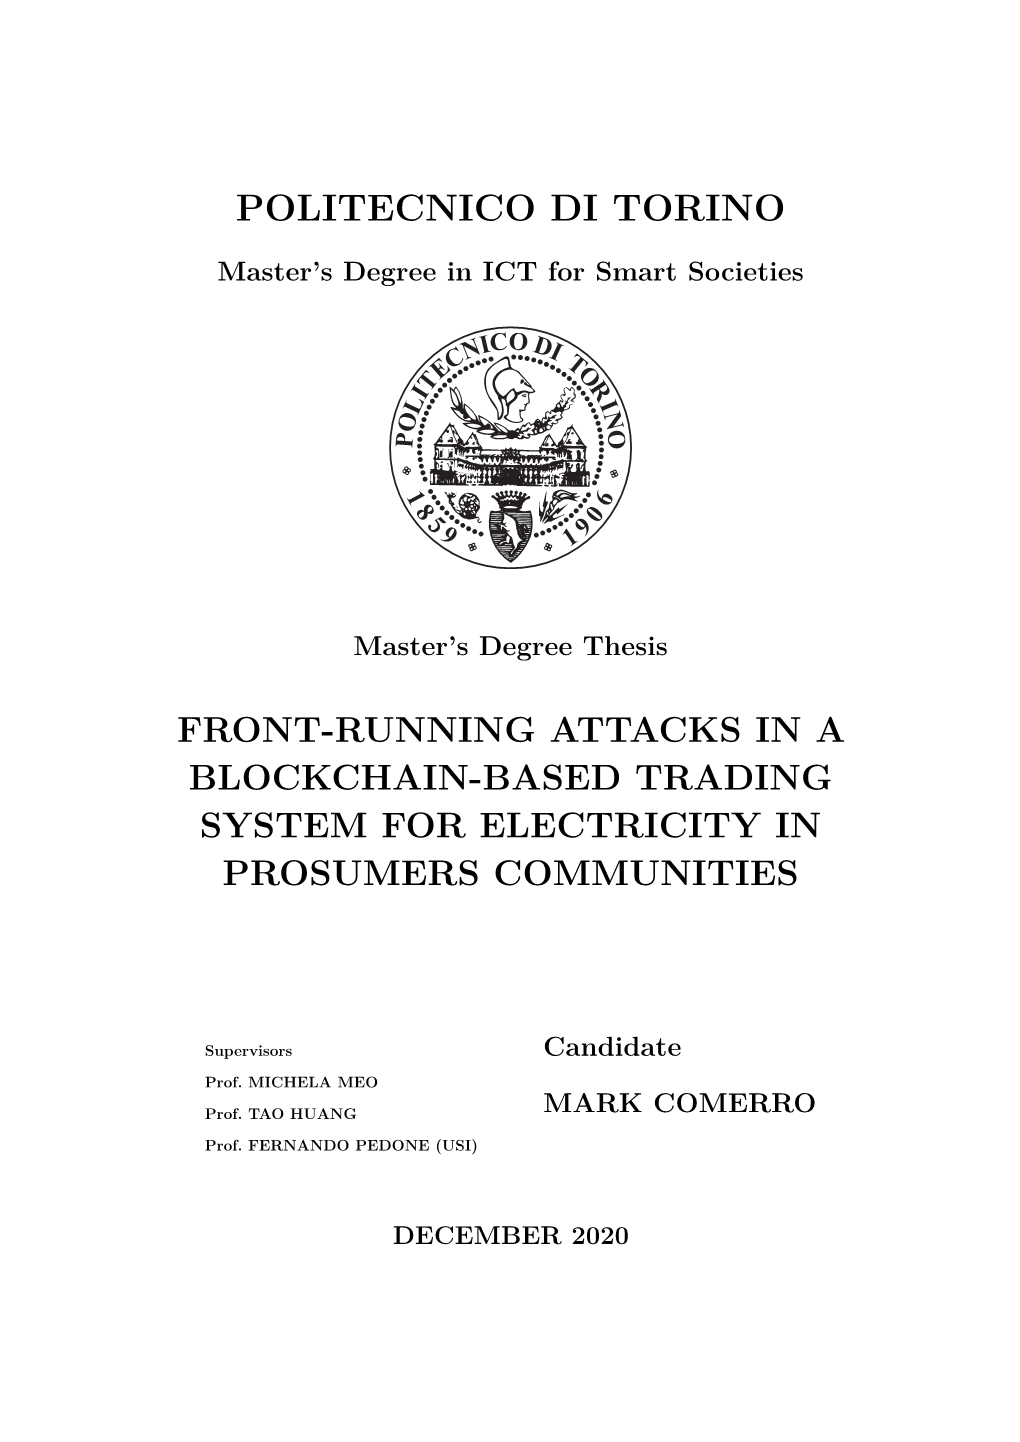 Front-Running Attacks in a Blockchain-Based Trading System for Electricity in Prosumers Communities